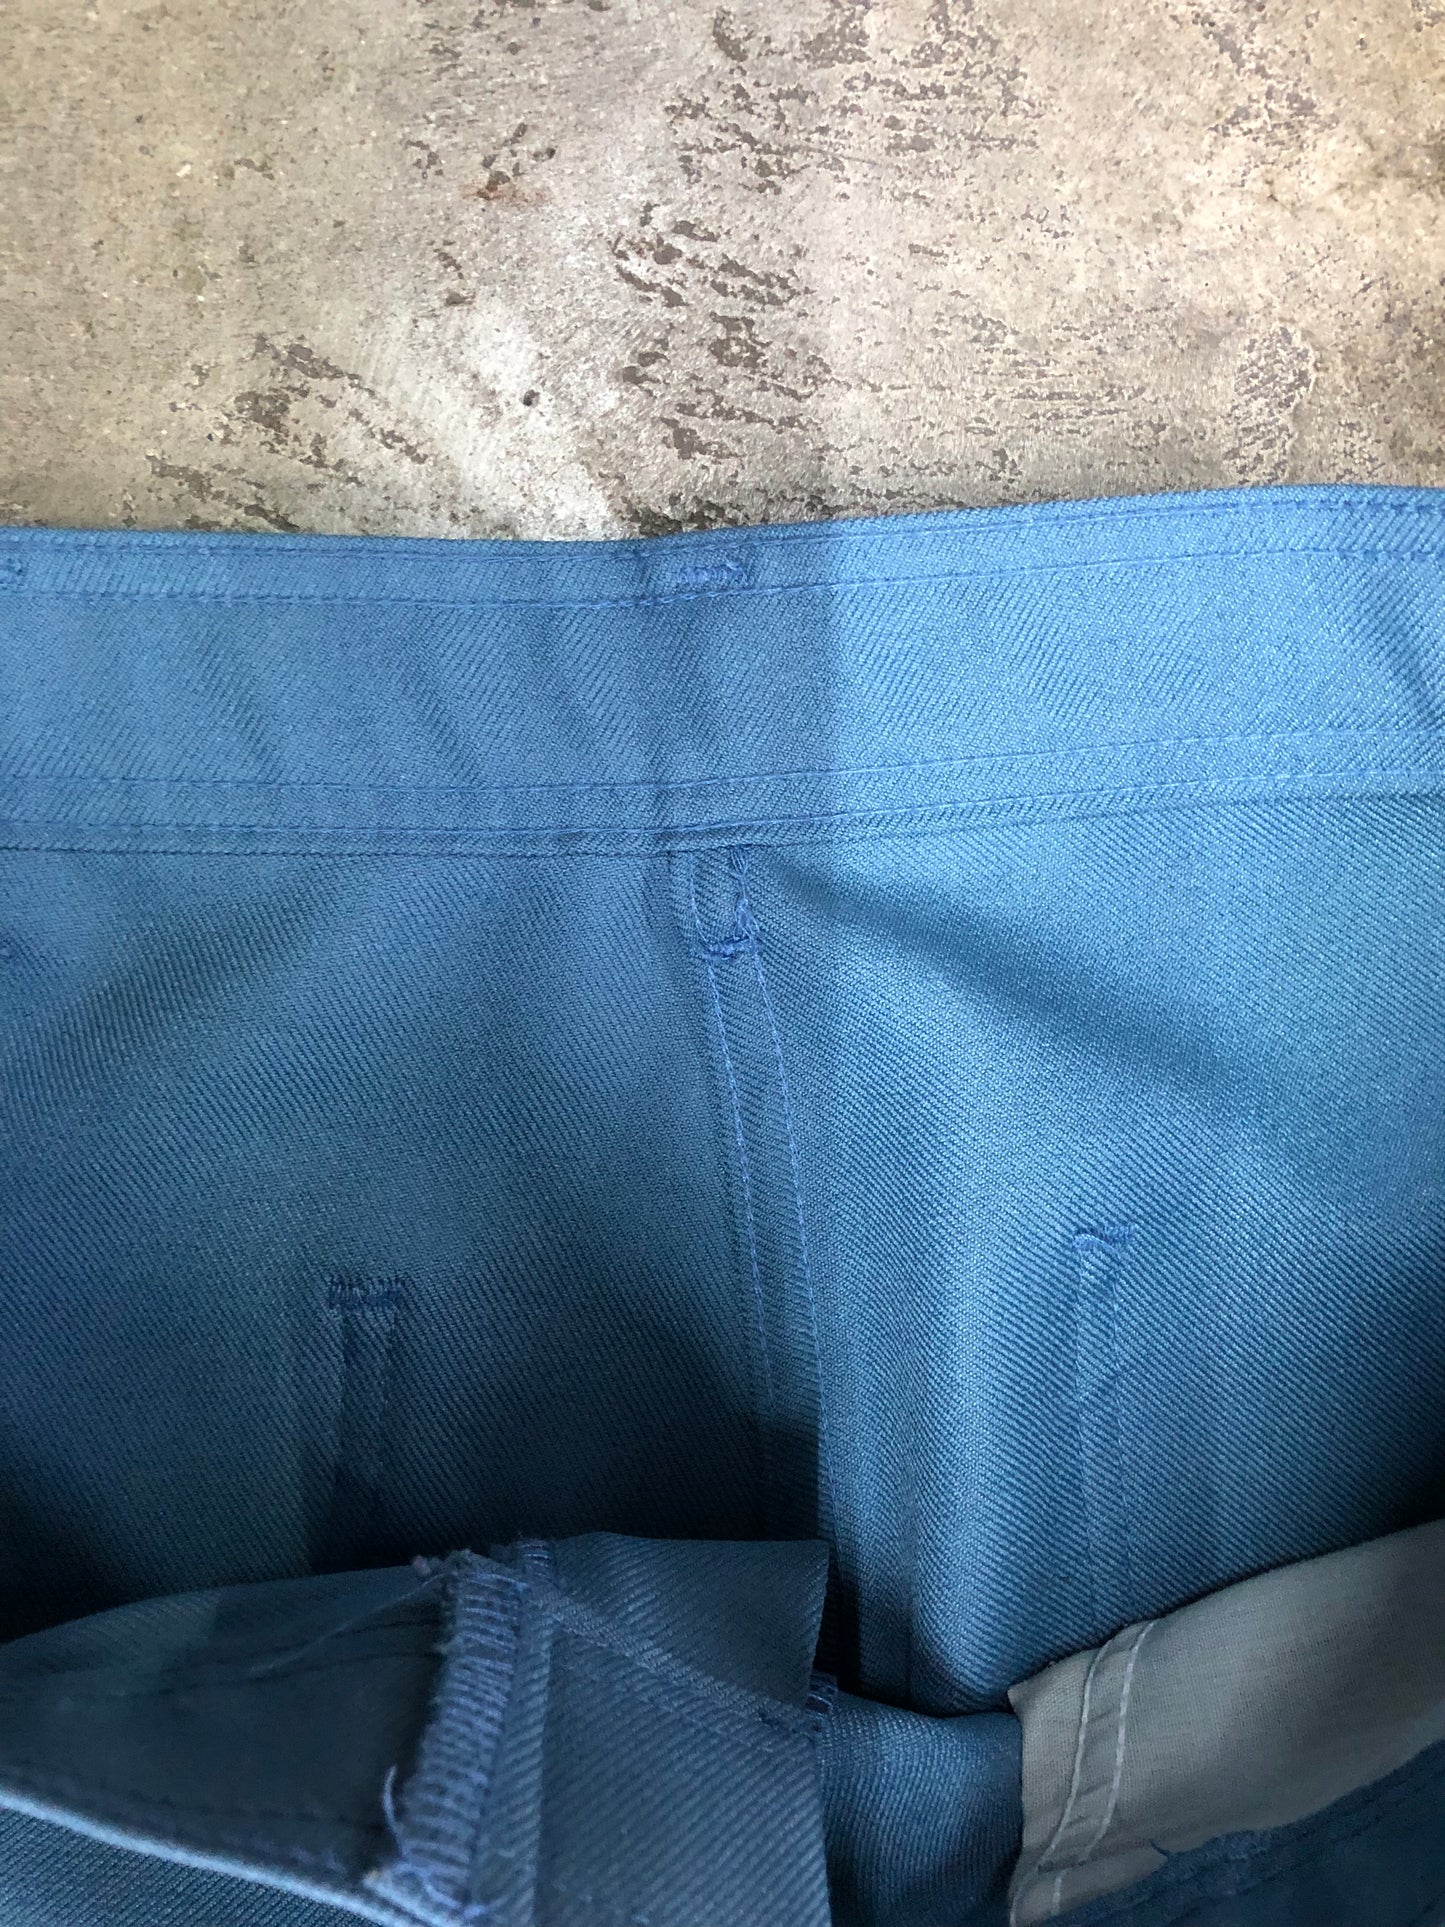 Load image into Gallery viewer, VTG Blue Sport-About Trouser Pants Sz 36x31
